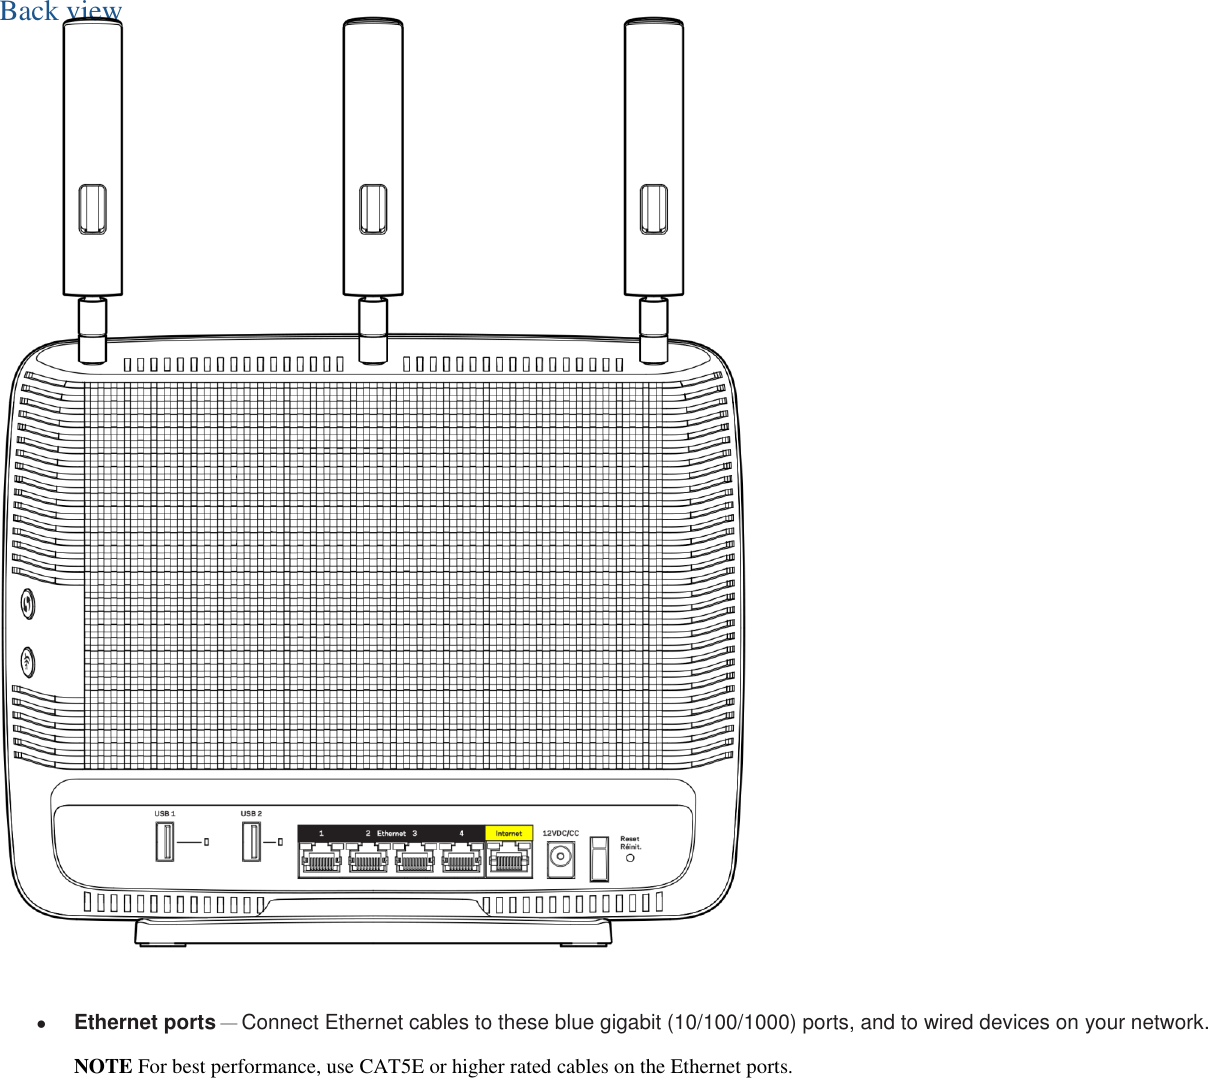 Back view   Ethernet ports — Connect Ethernet cables to these blue gigabit (10/100/1000) ports, and to wired devices on your network.     NOTE For best performance, use CAT5E or higher rated cables on the Ethernet ports. 